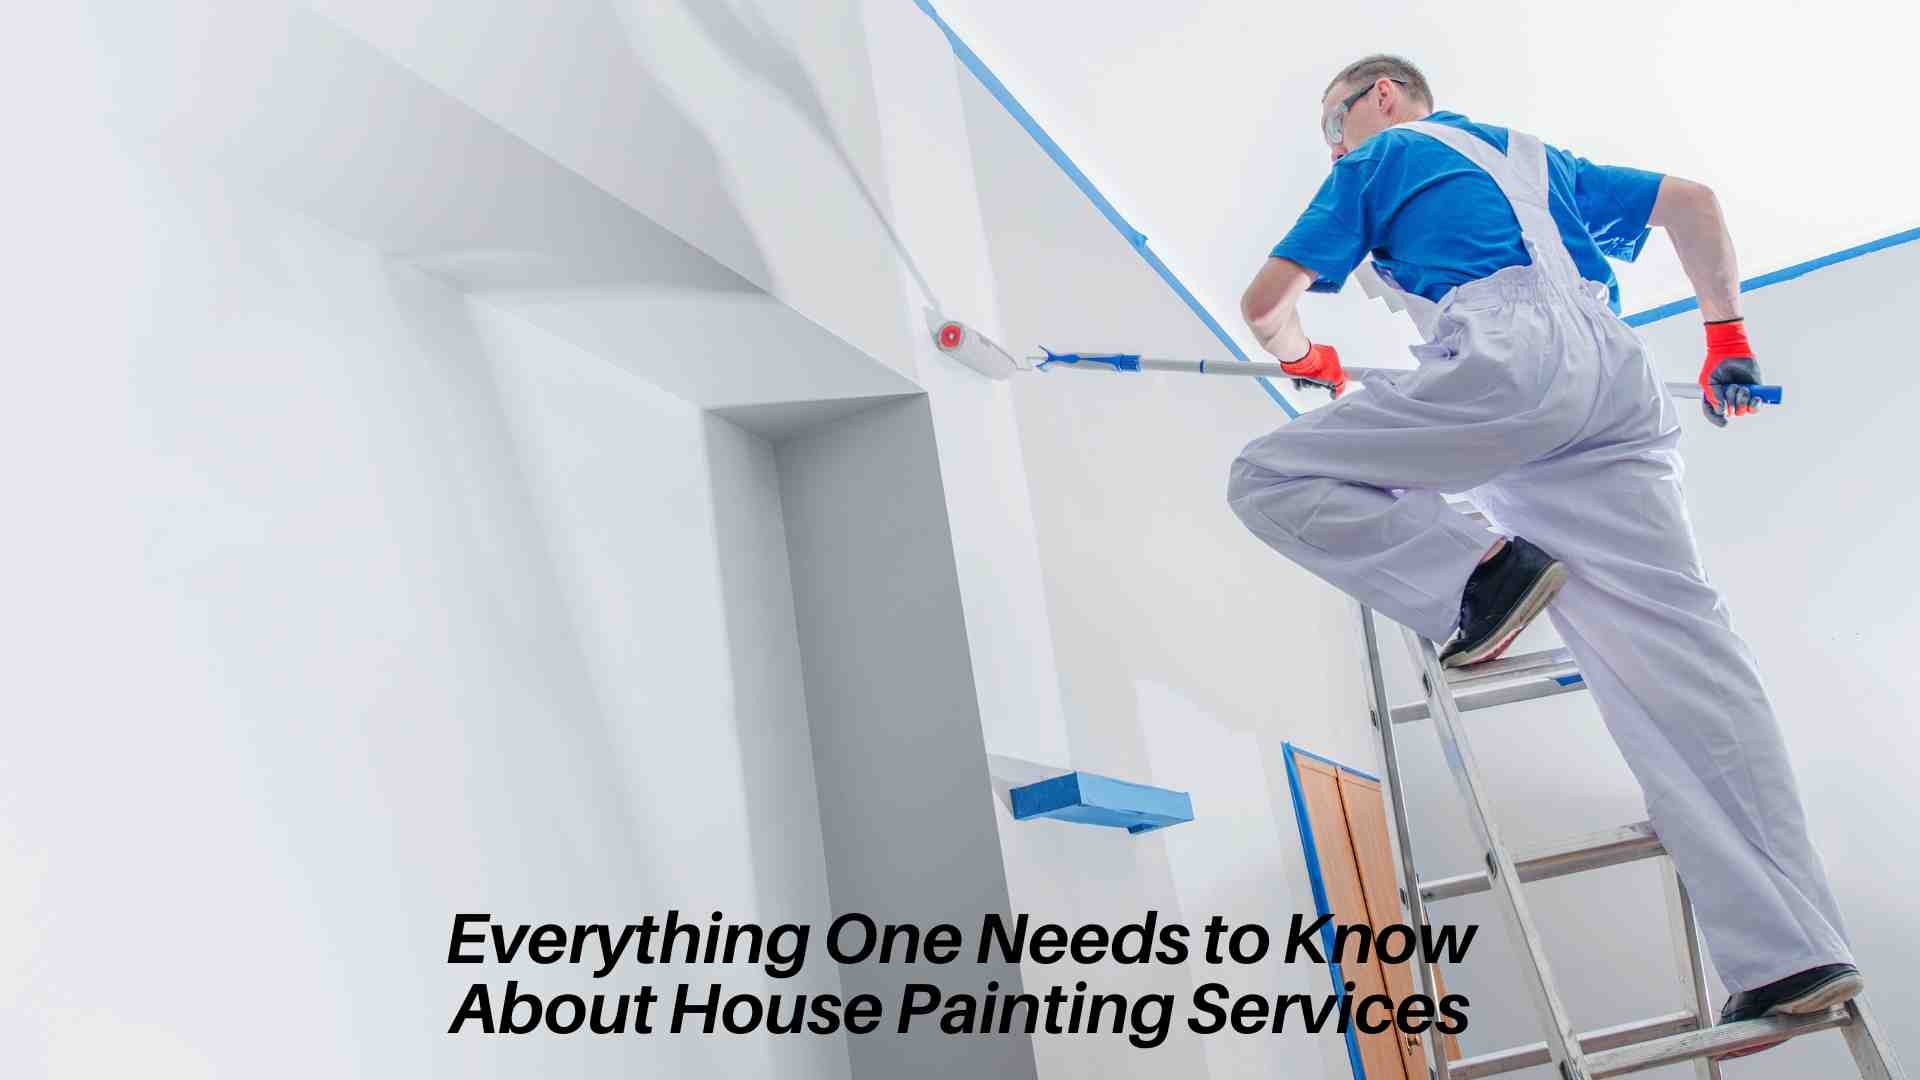 Everything One Needs to Know About House Painting Services